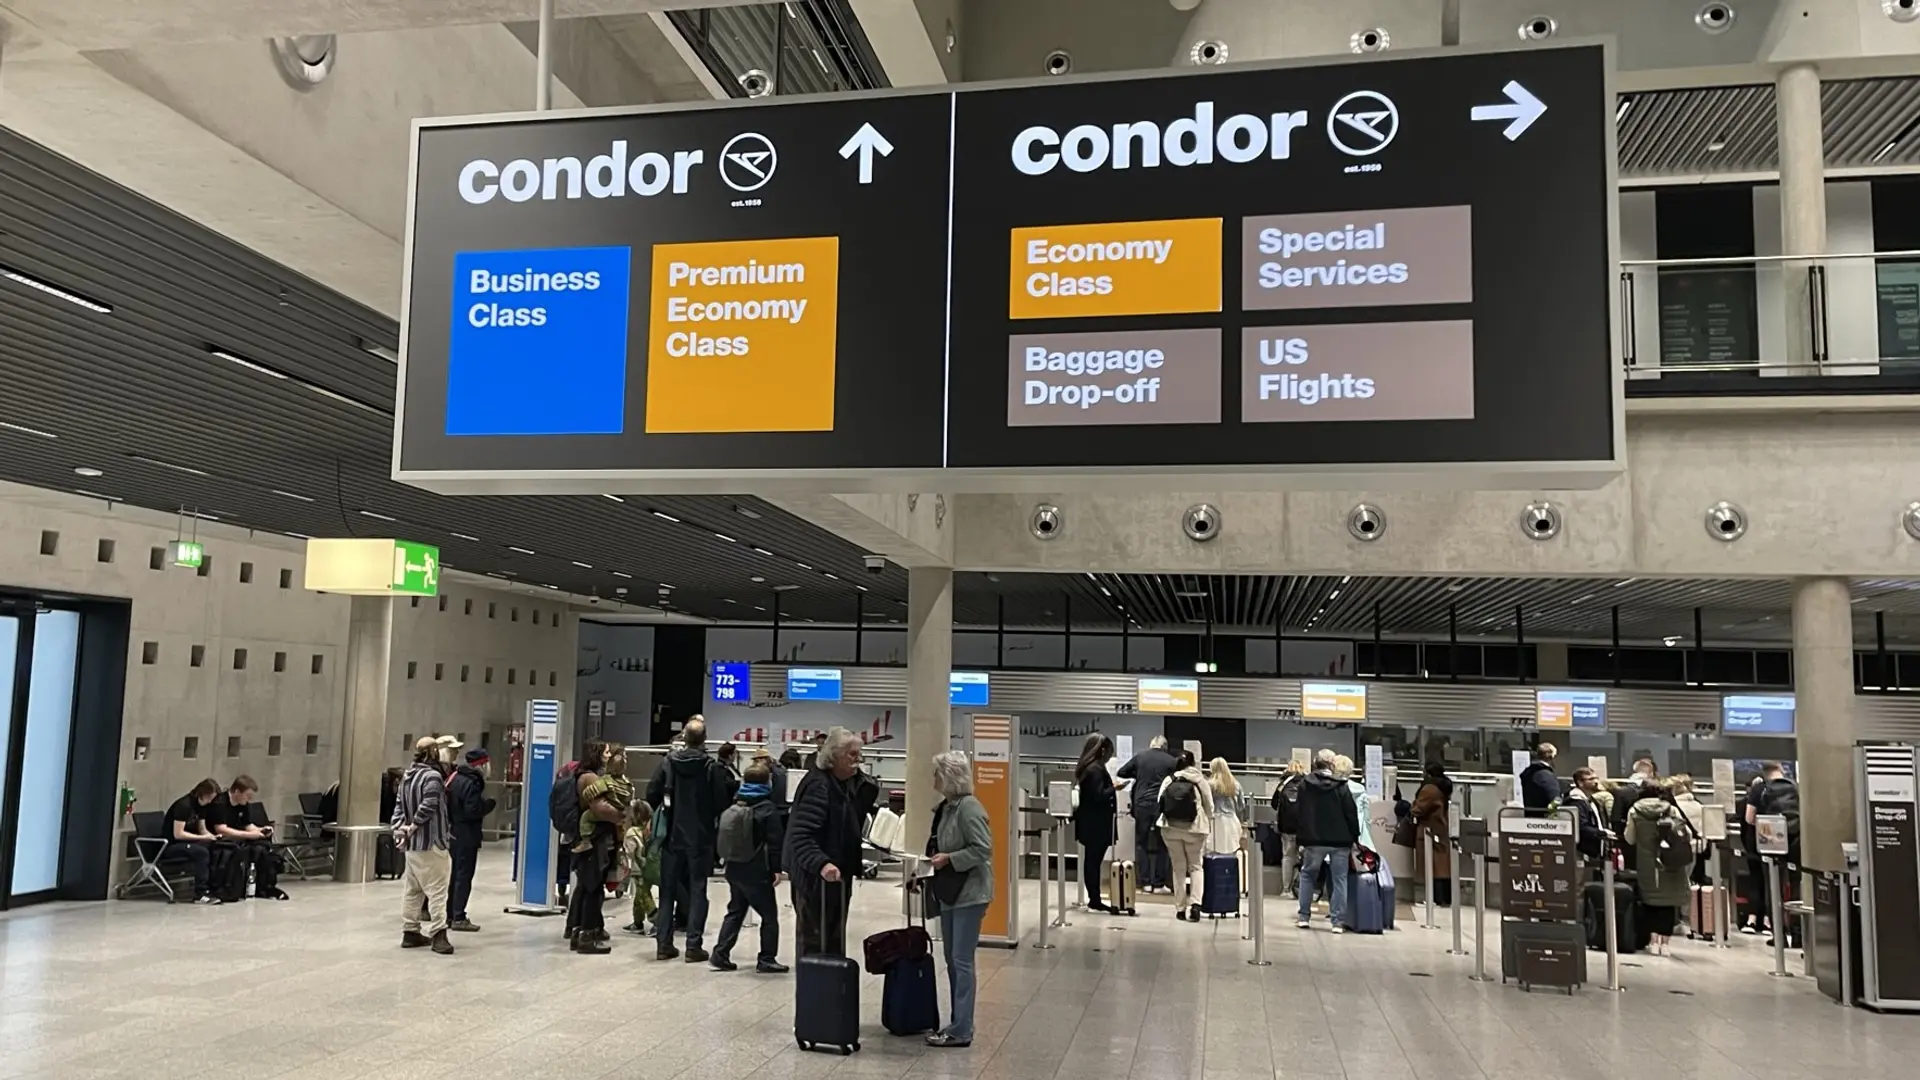 Airline review Airport experience - Condor - 1